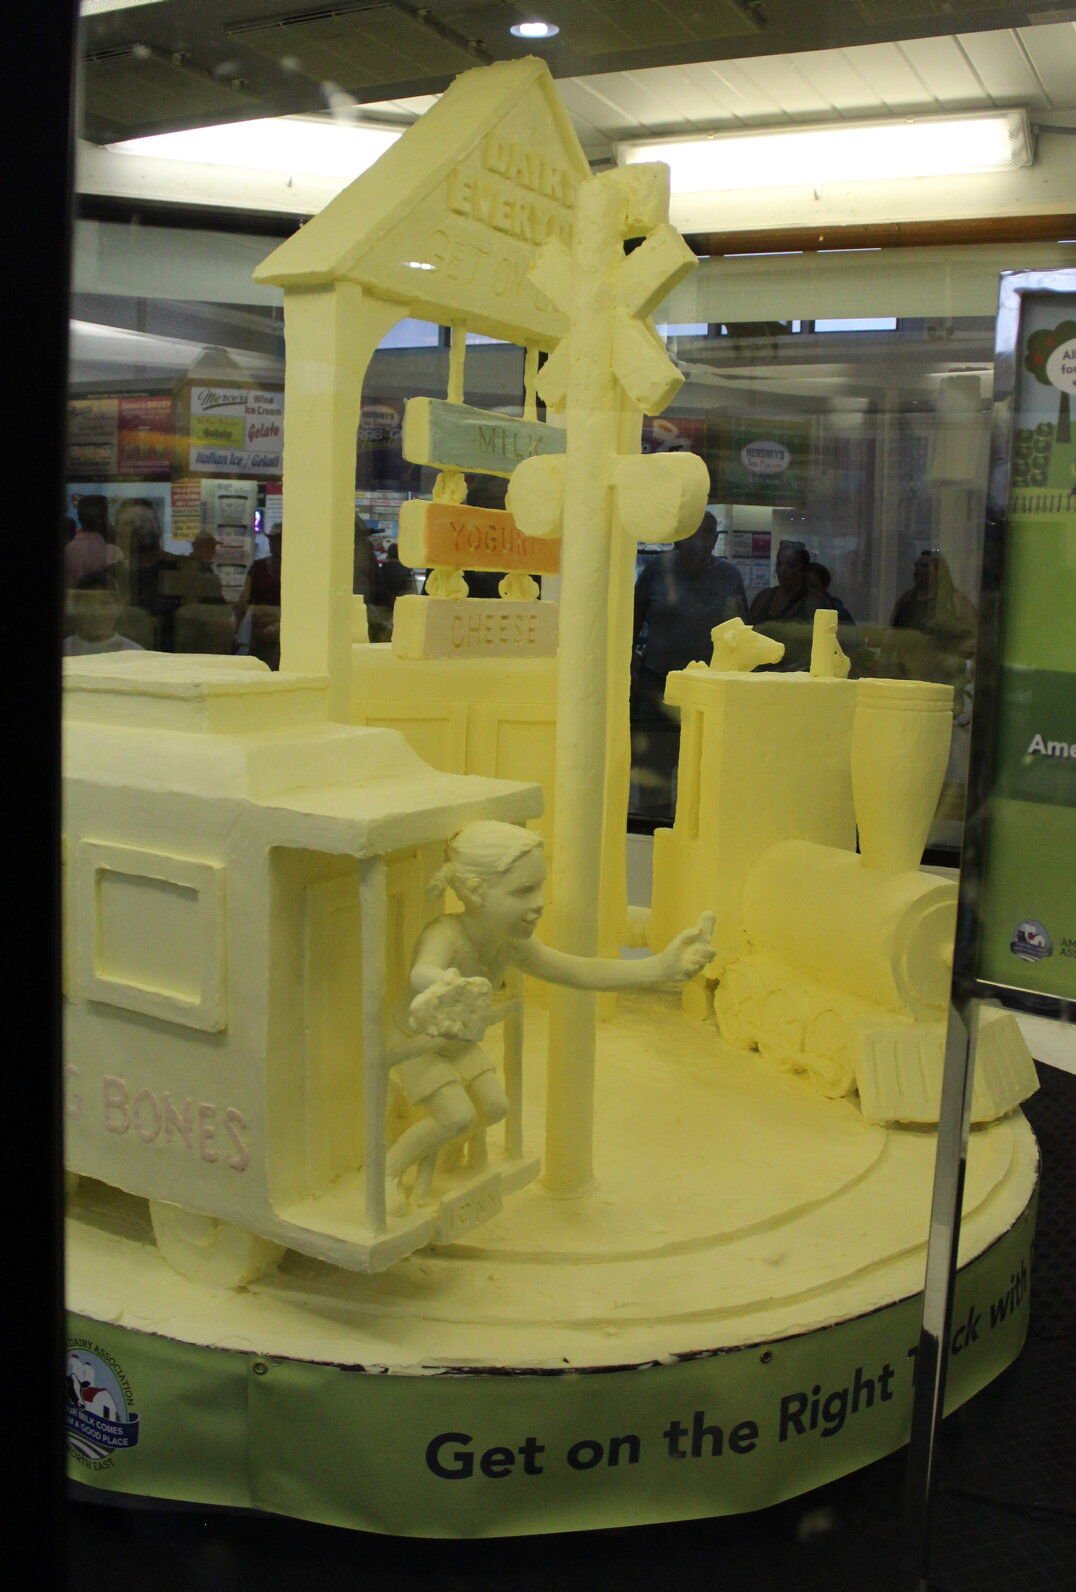 Butter sculpture for NYS Fair unveiled at Syracuse fairgrounds